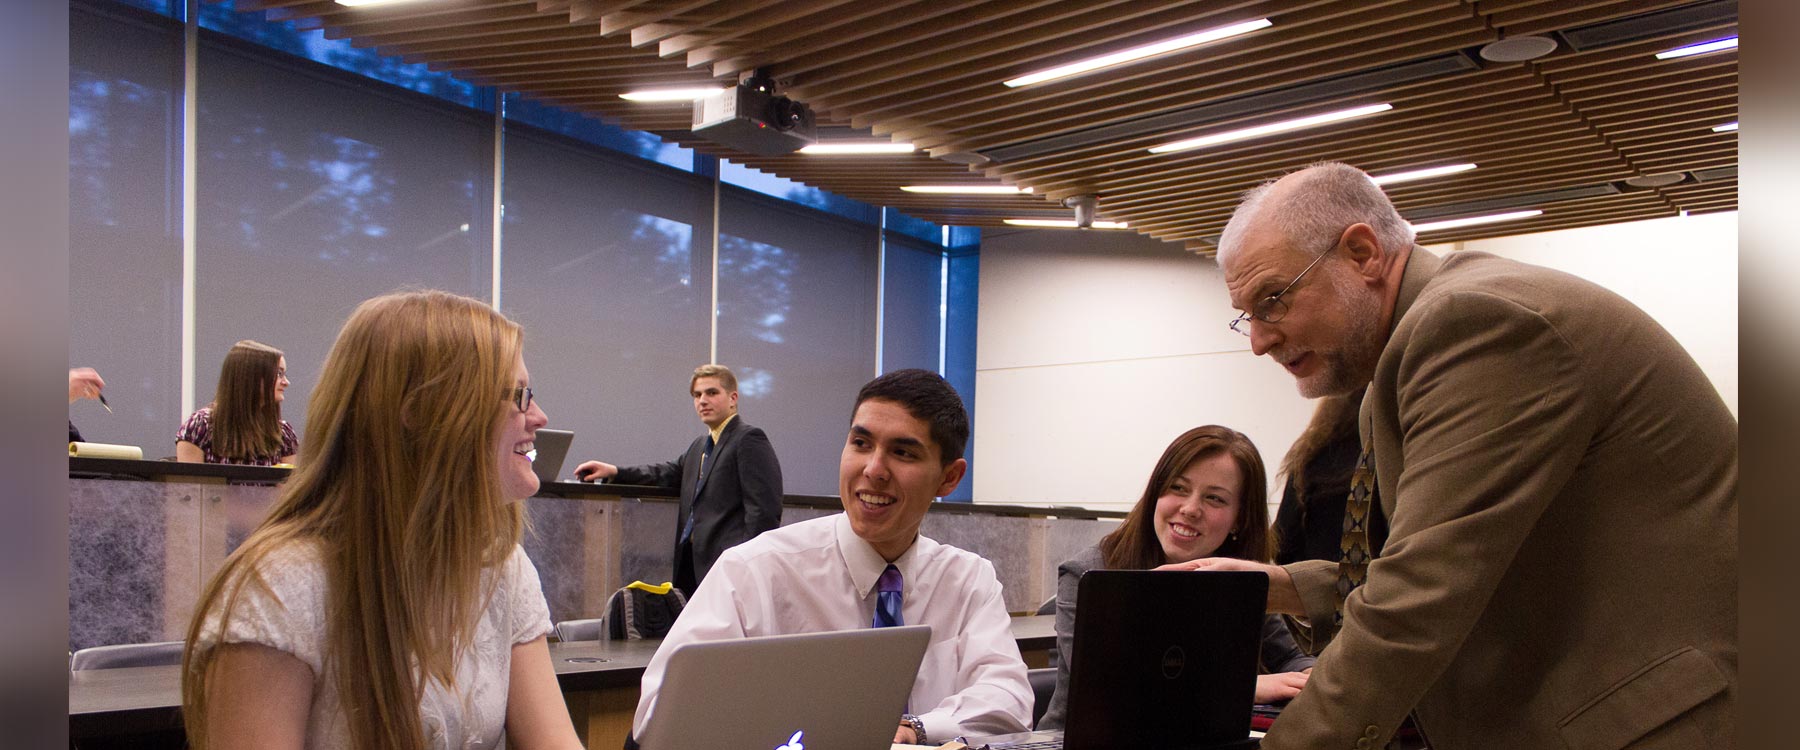 Three students sit in a row behind a table. On the other side, a professor leans on the table and speaks with them.